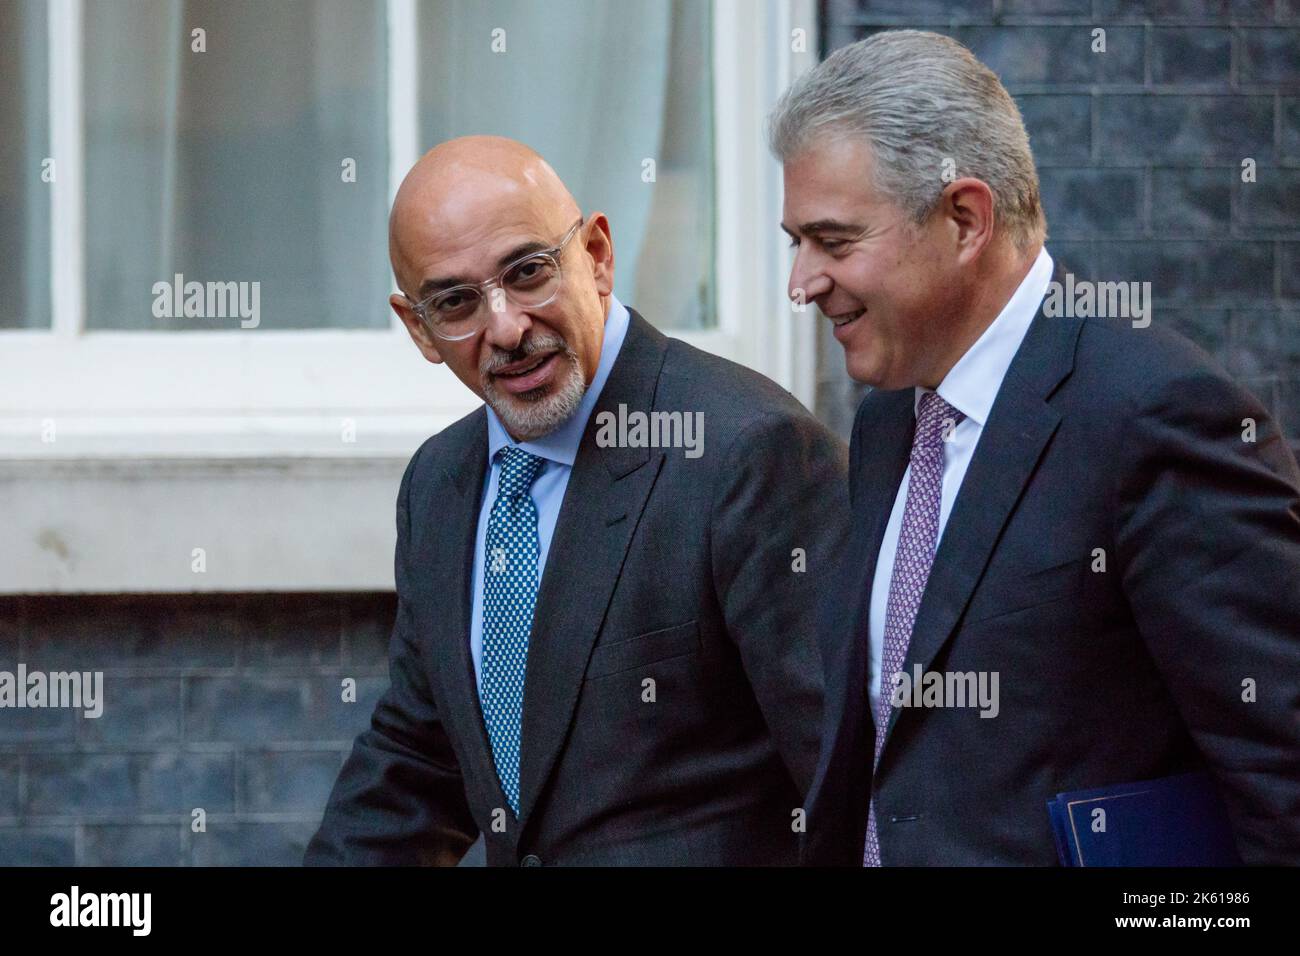 Downing Street, London, UK. 11th October 2022. Ministers attend the first Cabinet Meeting at 10 Downing Street since the Conservative Party Conference last week. Nadhim Zahawi MP, Chancellor of the Duchy of Lancaster, Minister for Intergovernmental Relations and Minister for Equalities and Brandon Lewis CBE MP, Lord Chancellor and Secretary of State for Justice. Photo:Amanda Rose/Alamy Live News Stock Photo